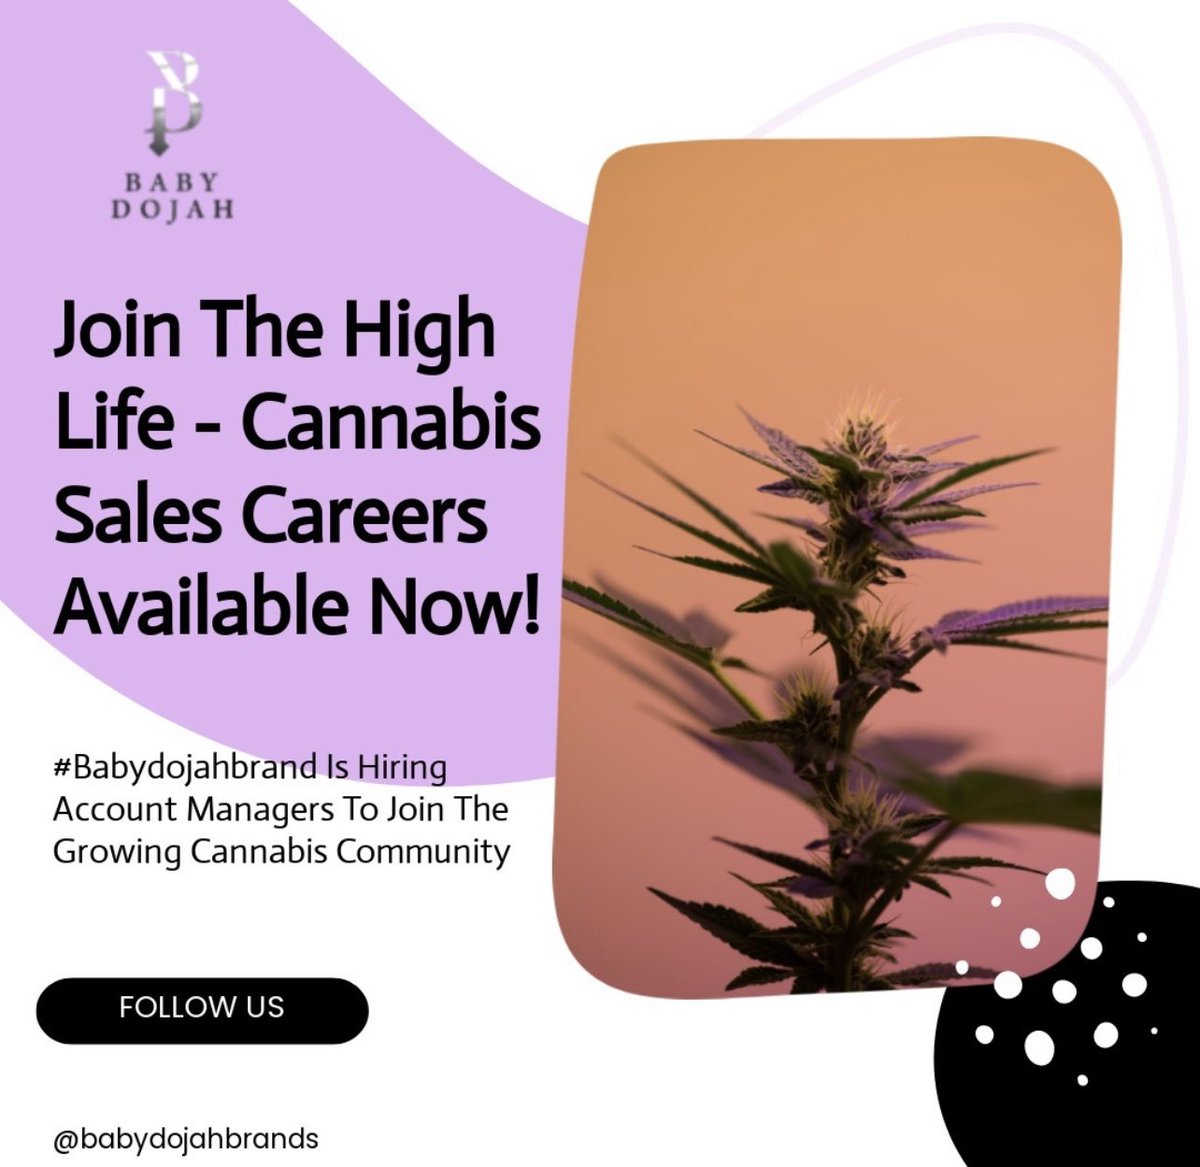 The Baby Dojah brand is looking for talented account managers to join our team
#nowhiring 
#babydojah #babydojahbrands #babydojahbrand #buyfromwomen #womenowned #womenincannabis